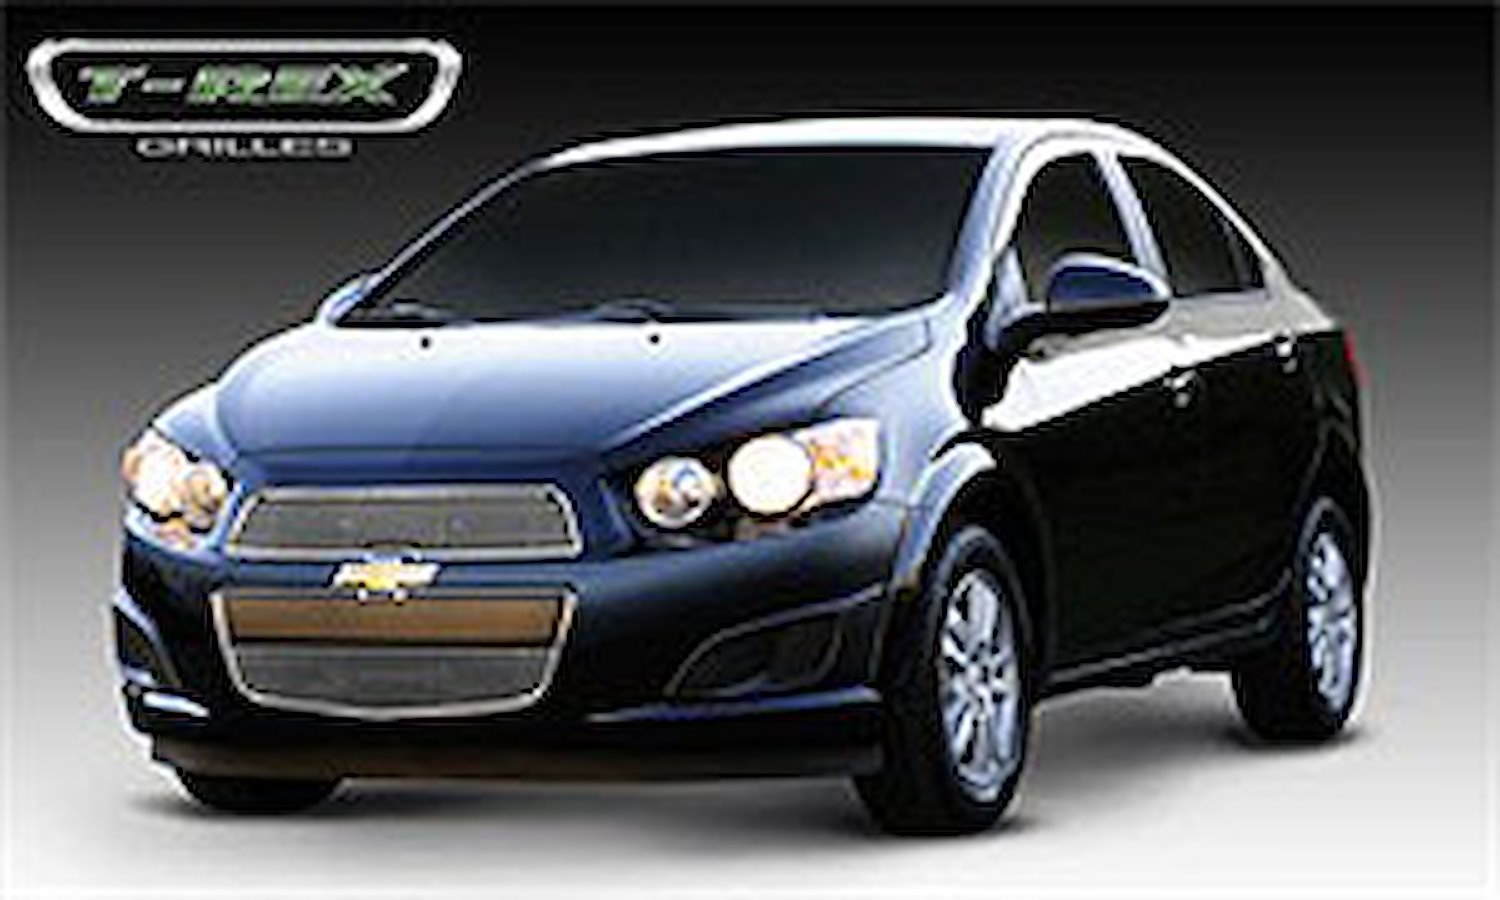 Billet Main Grille Overlay 2012-2013 Chevy Sonic